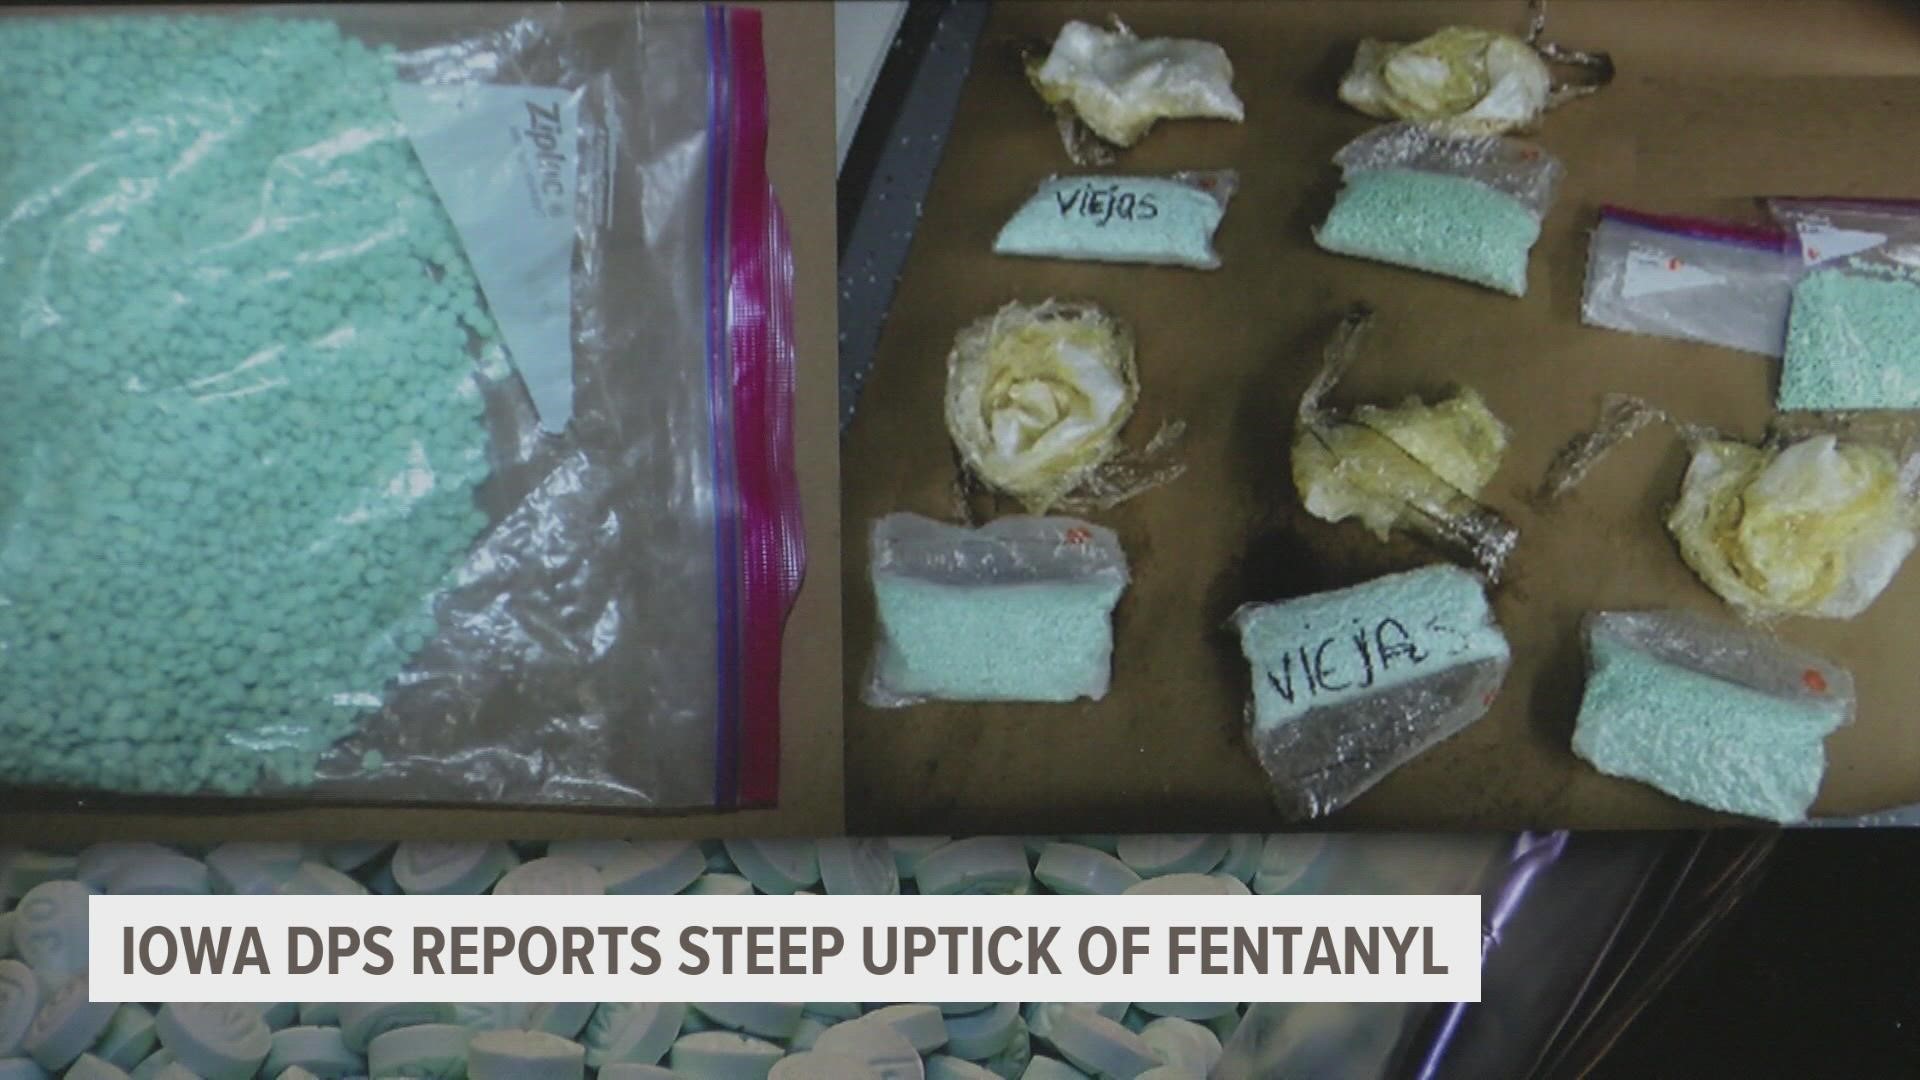 Last year, more than 17,000 fentanyl pills disguised as prescription drugs were analyzed - in 2022, that number has quadrupled.